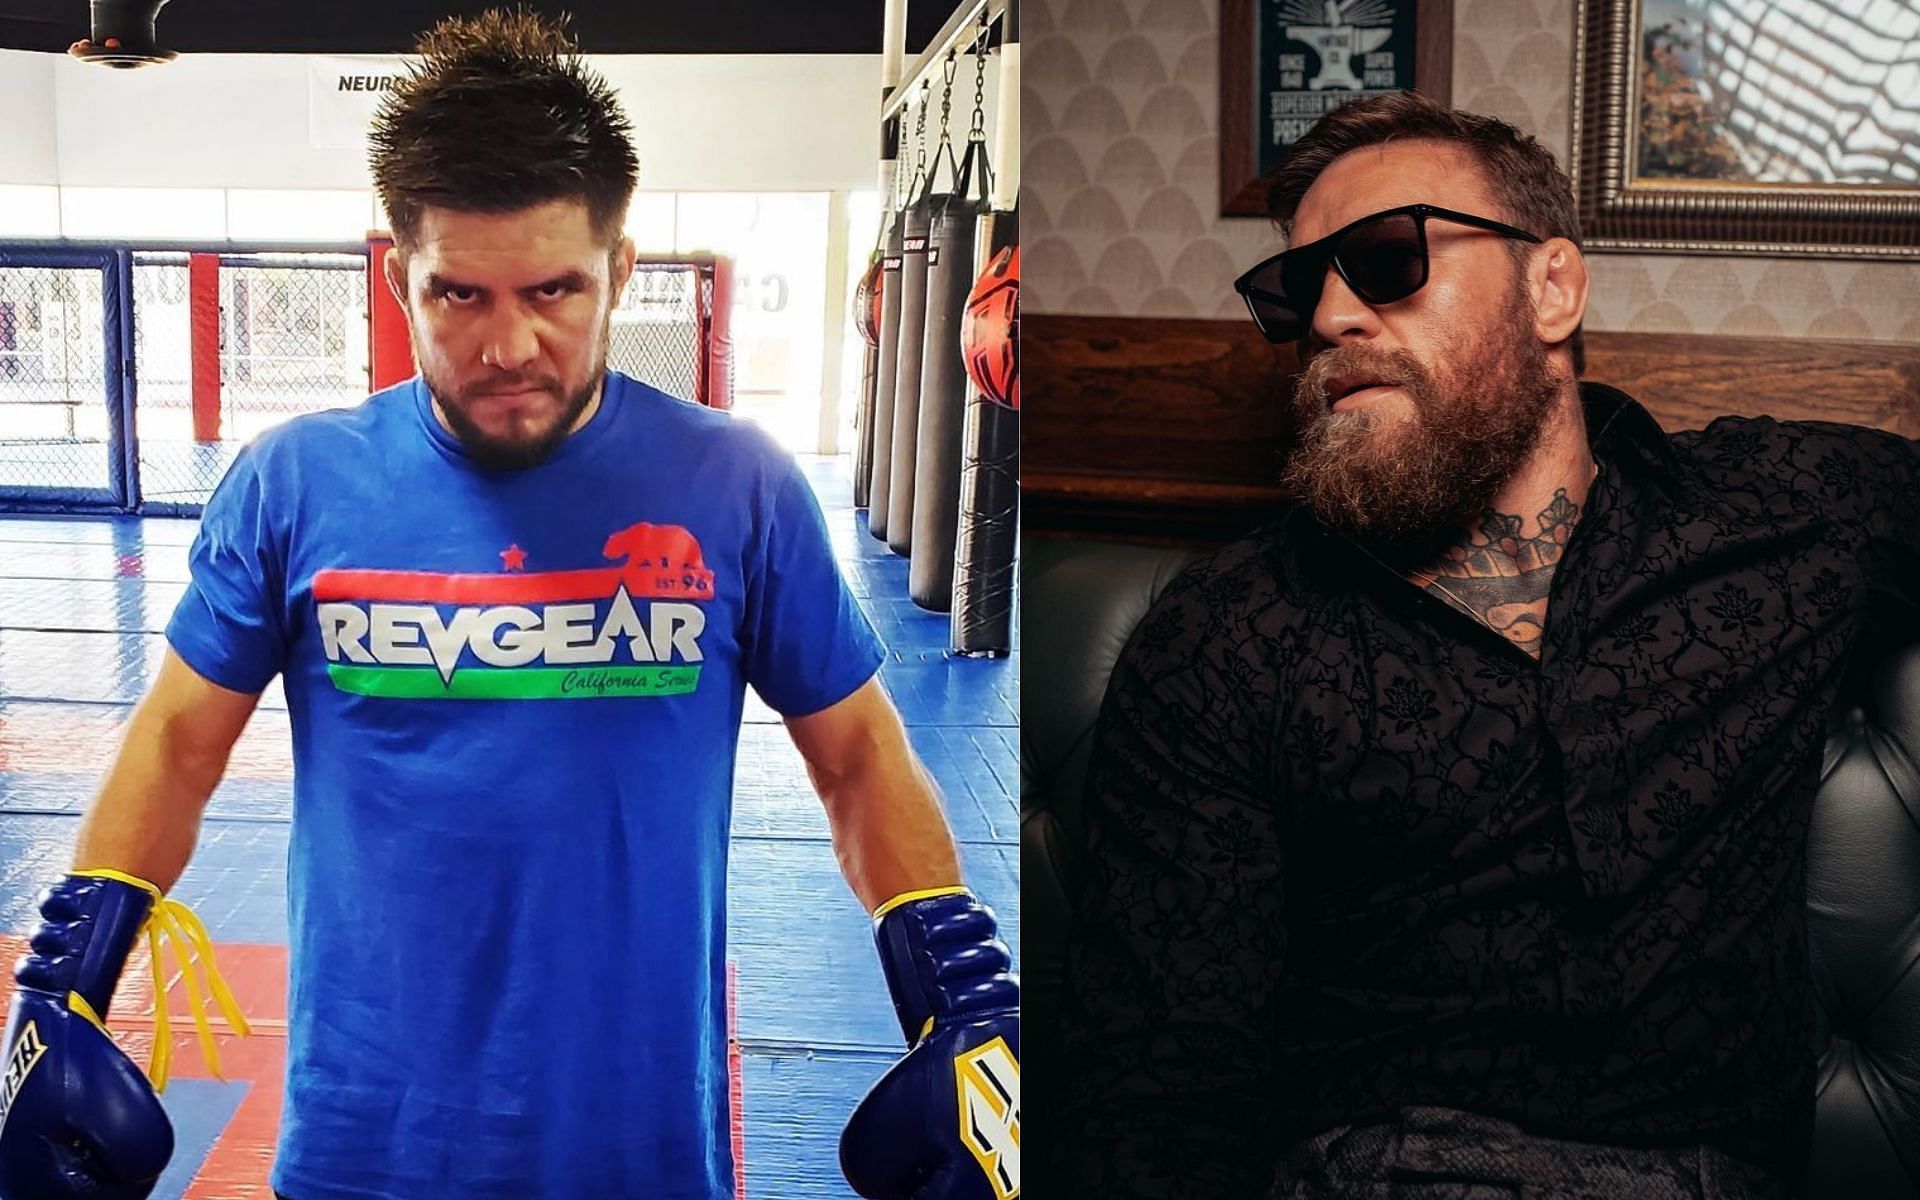 Henry Cejuo (Left) and Conor McGregor (Right) [Images via: @henry_cejudo and @thenotoriousmma on Instagram]